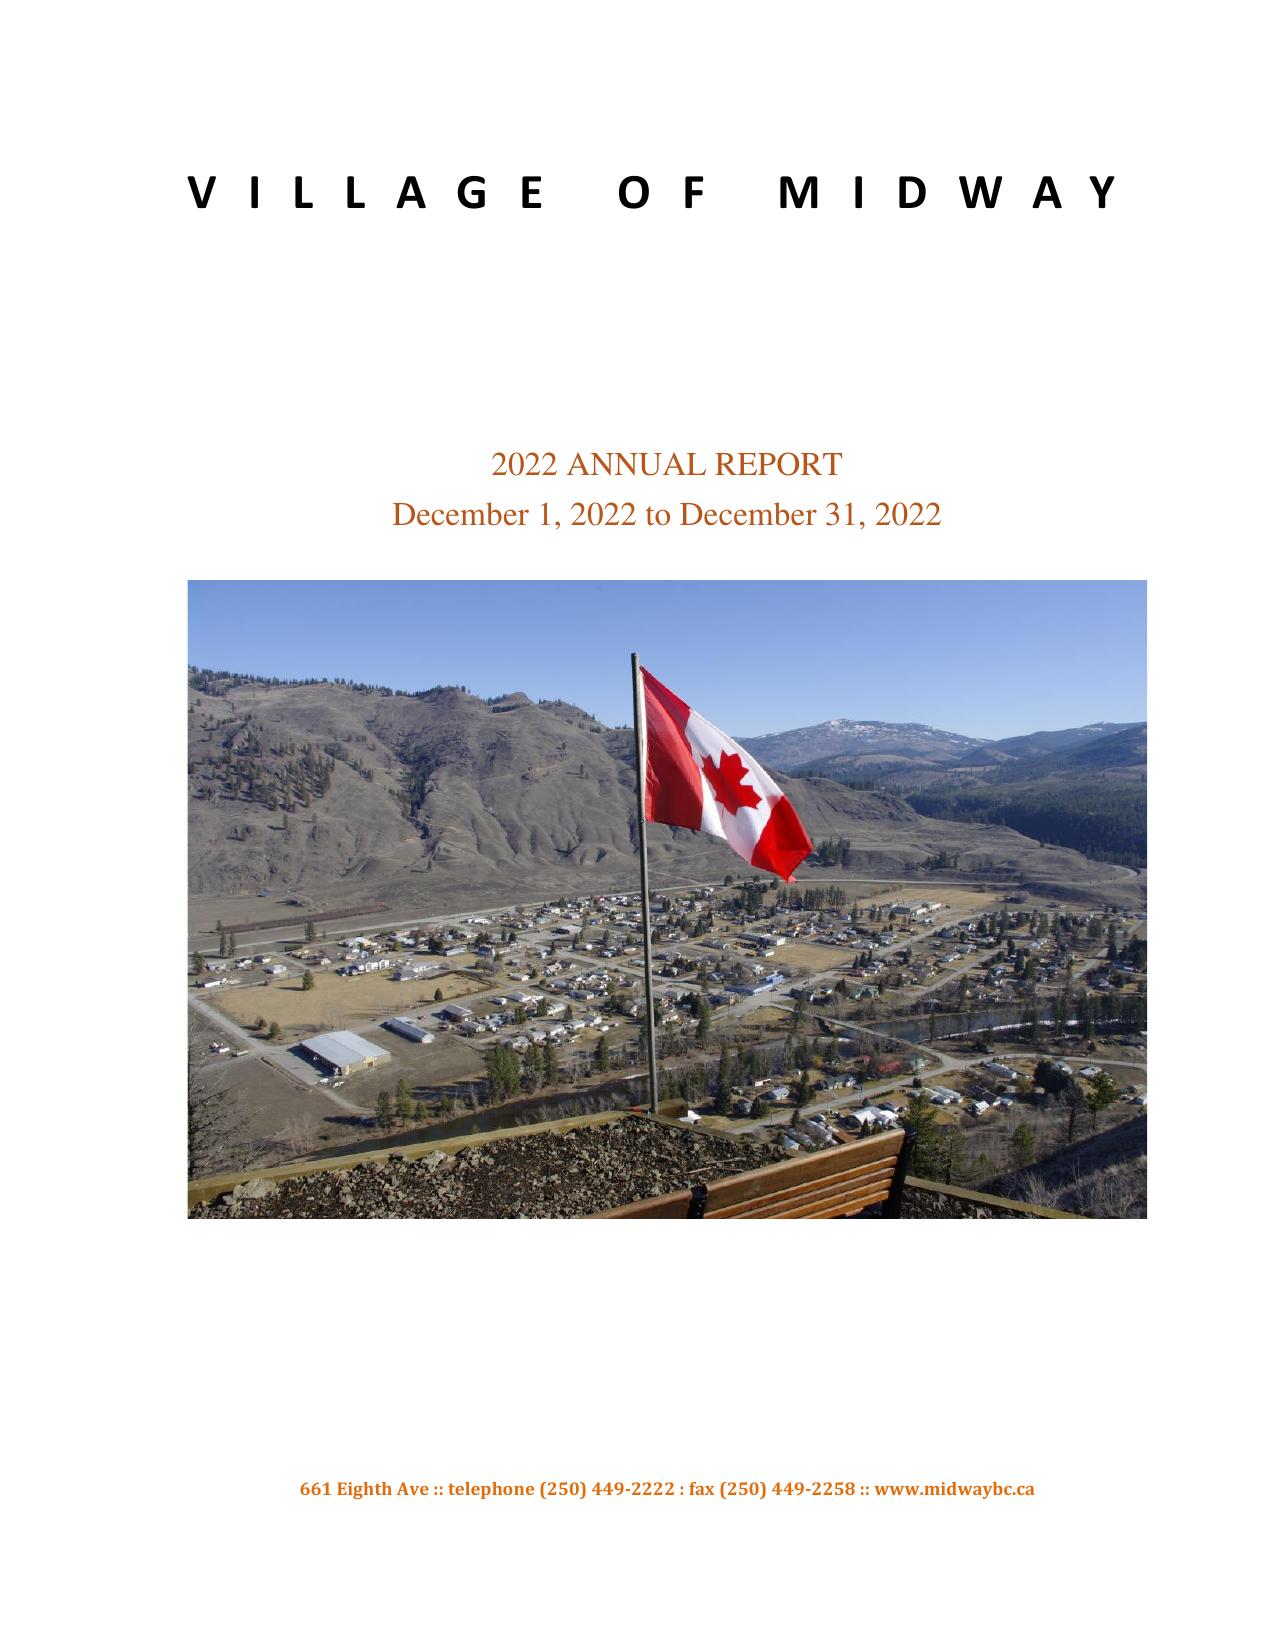 MIDWAYBC 2023 Annual Report